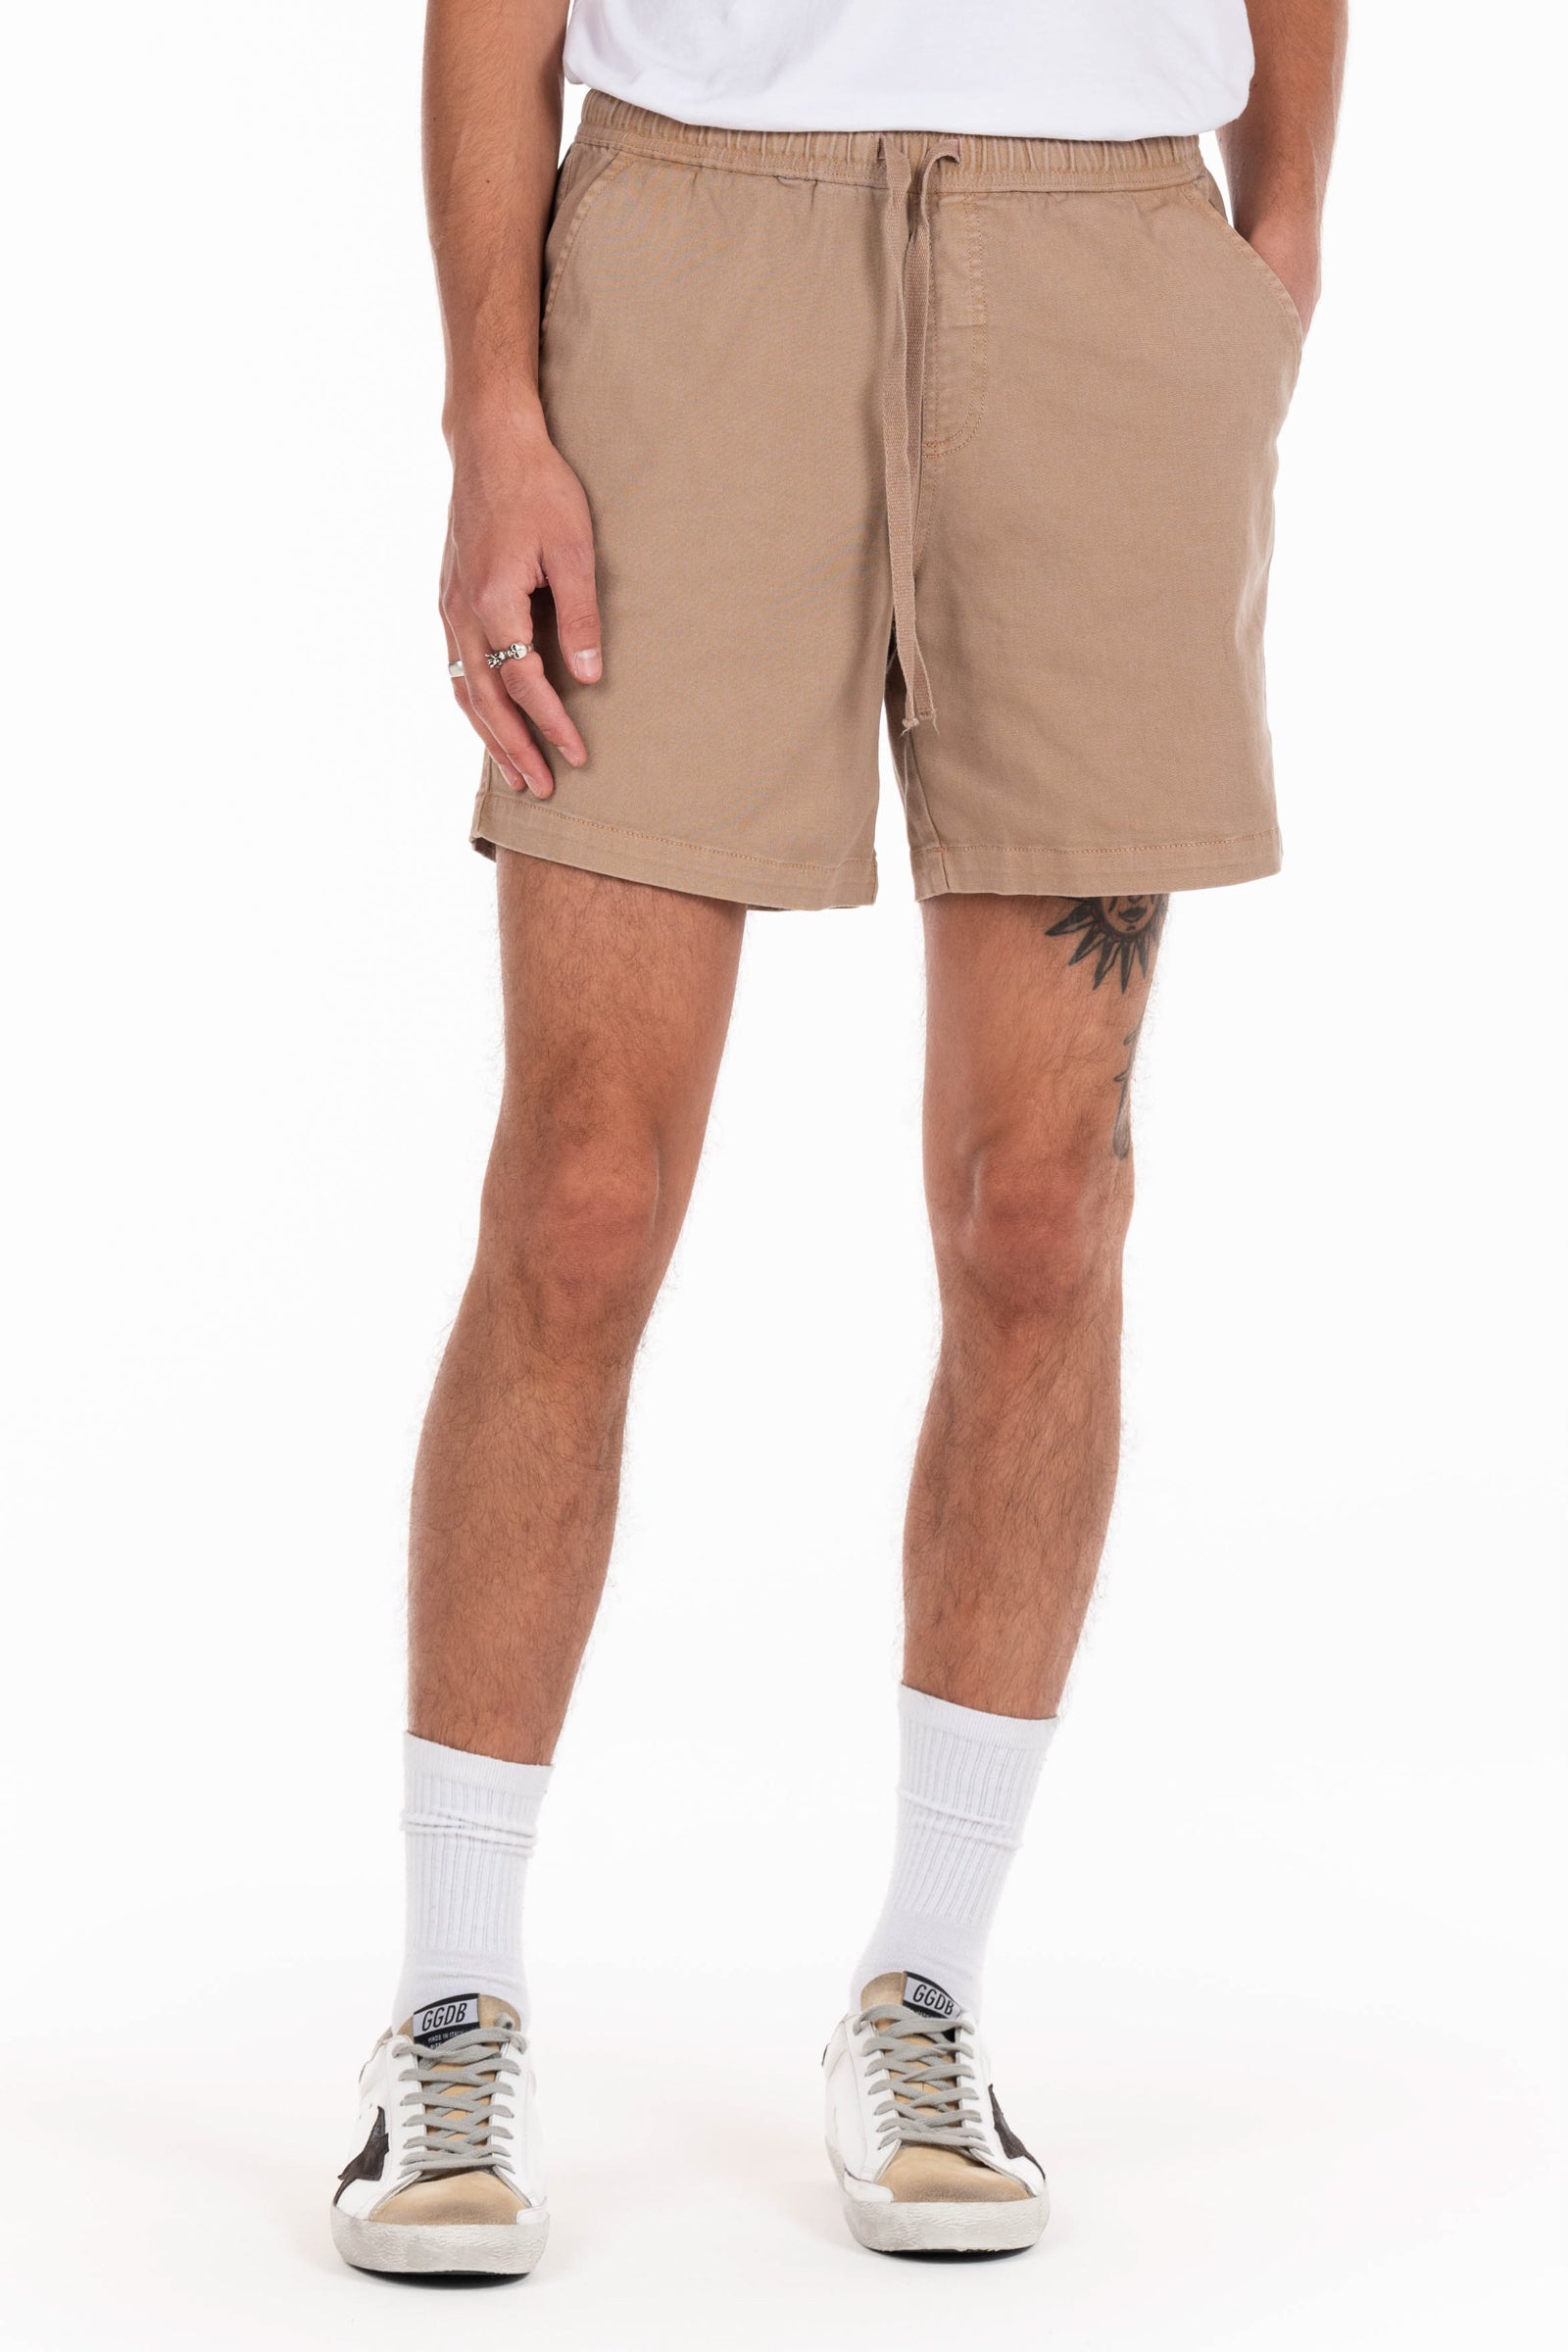 Original Paperbacks San Diego Volley Short in Khaki on Model Cropped Styled View